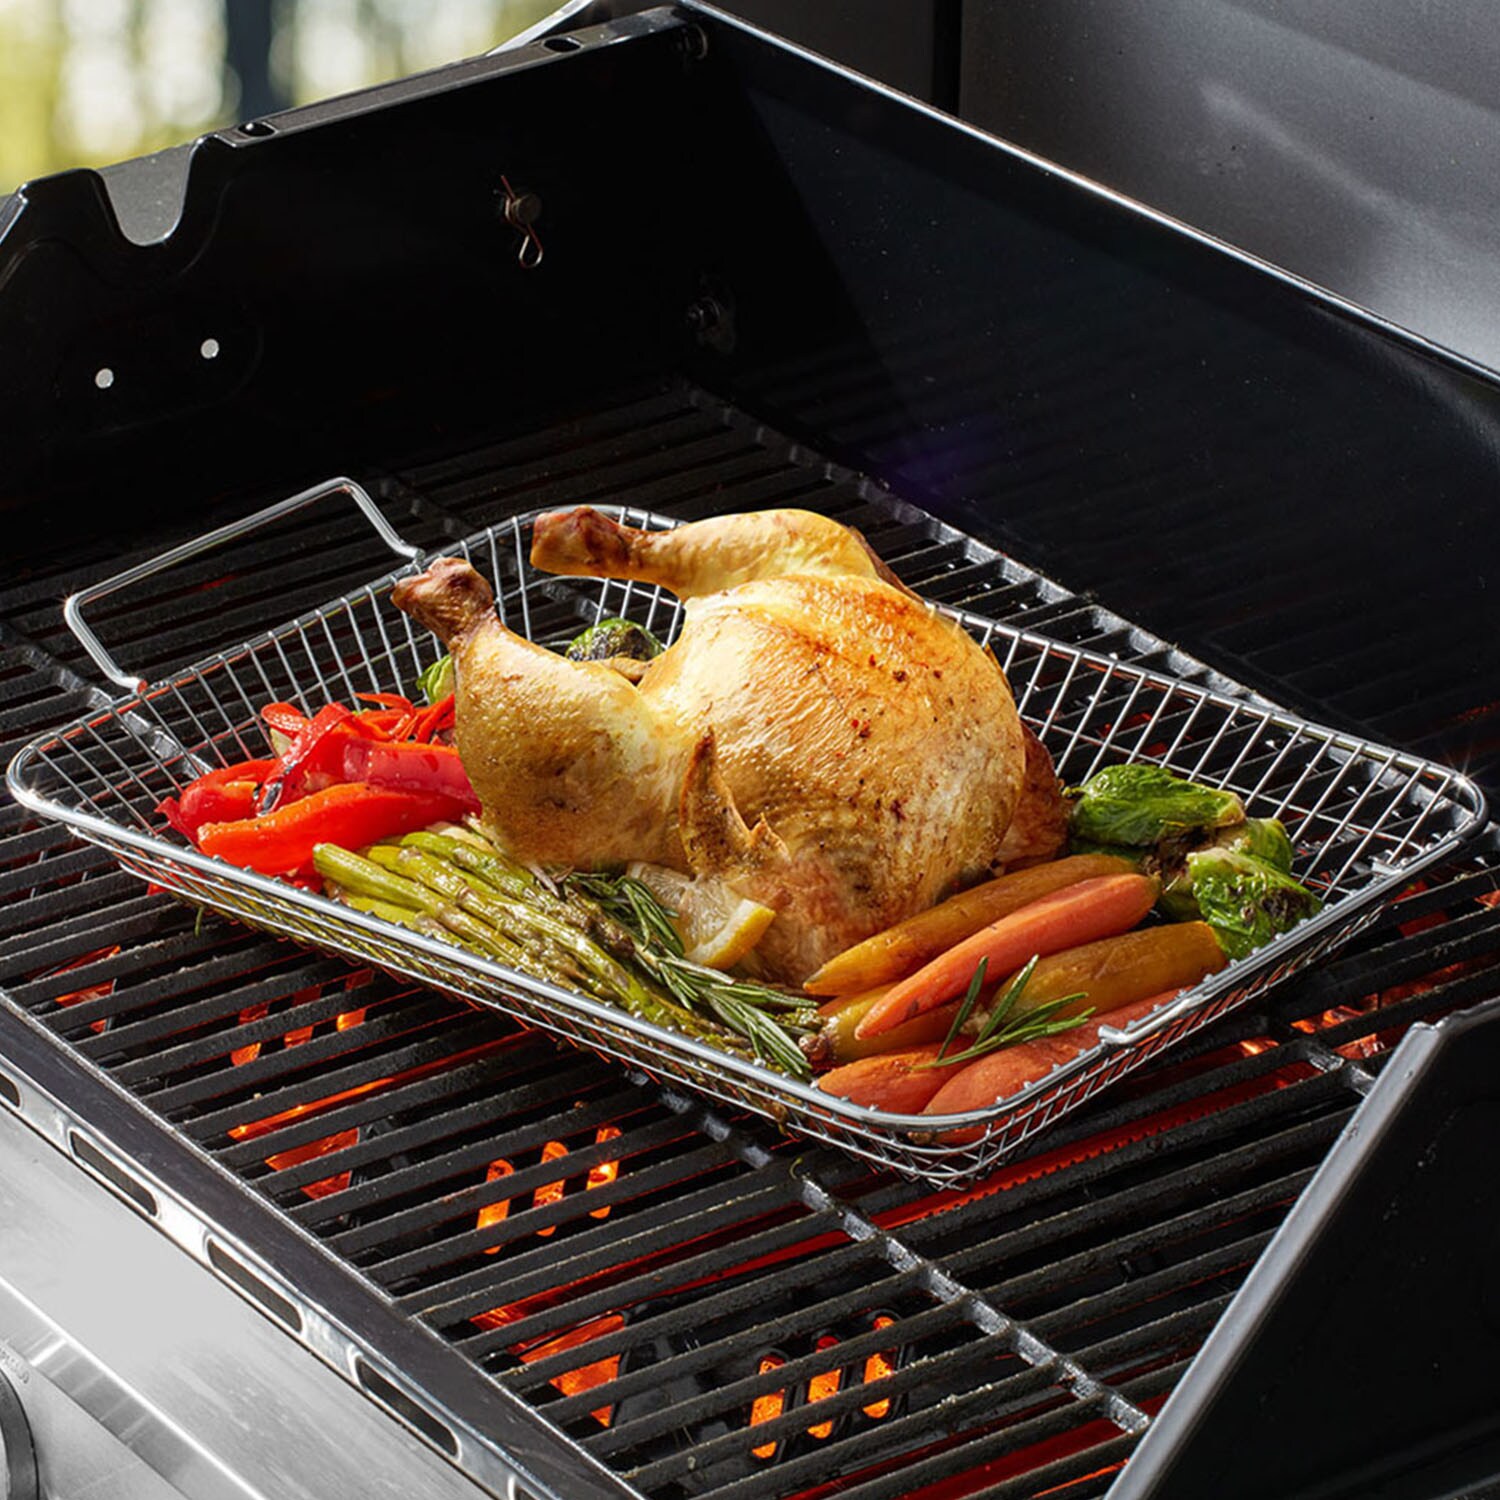 69616 by Broil King - ALUMINUM RIB ROASTER LINERS